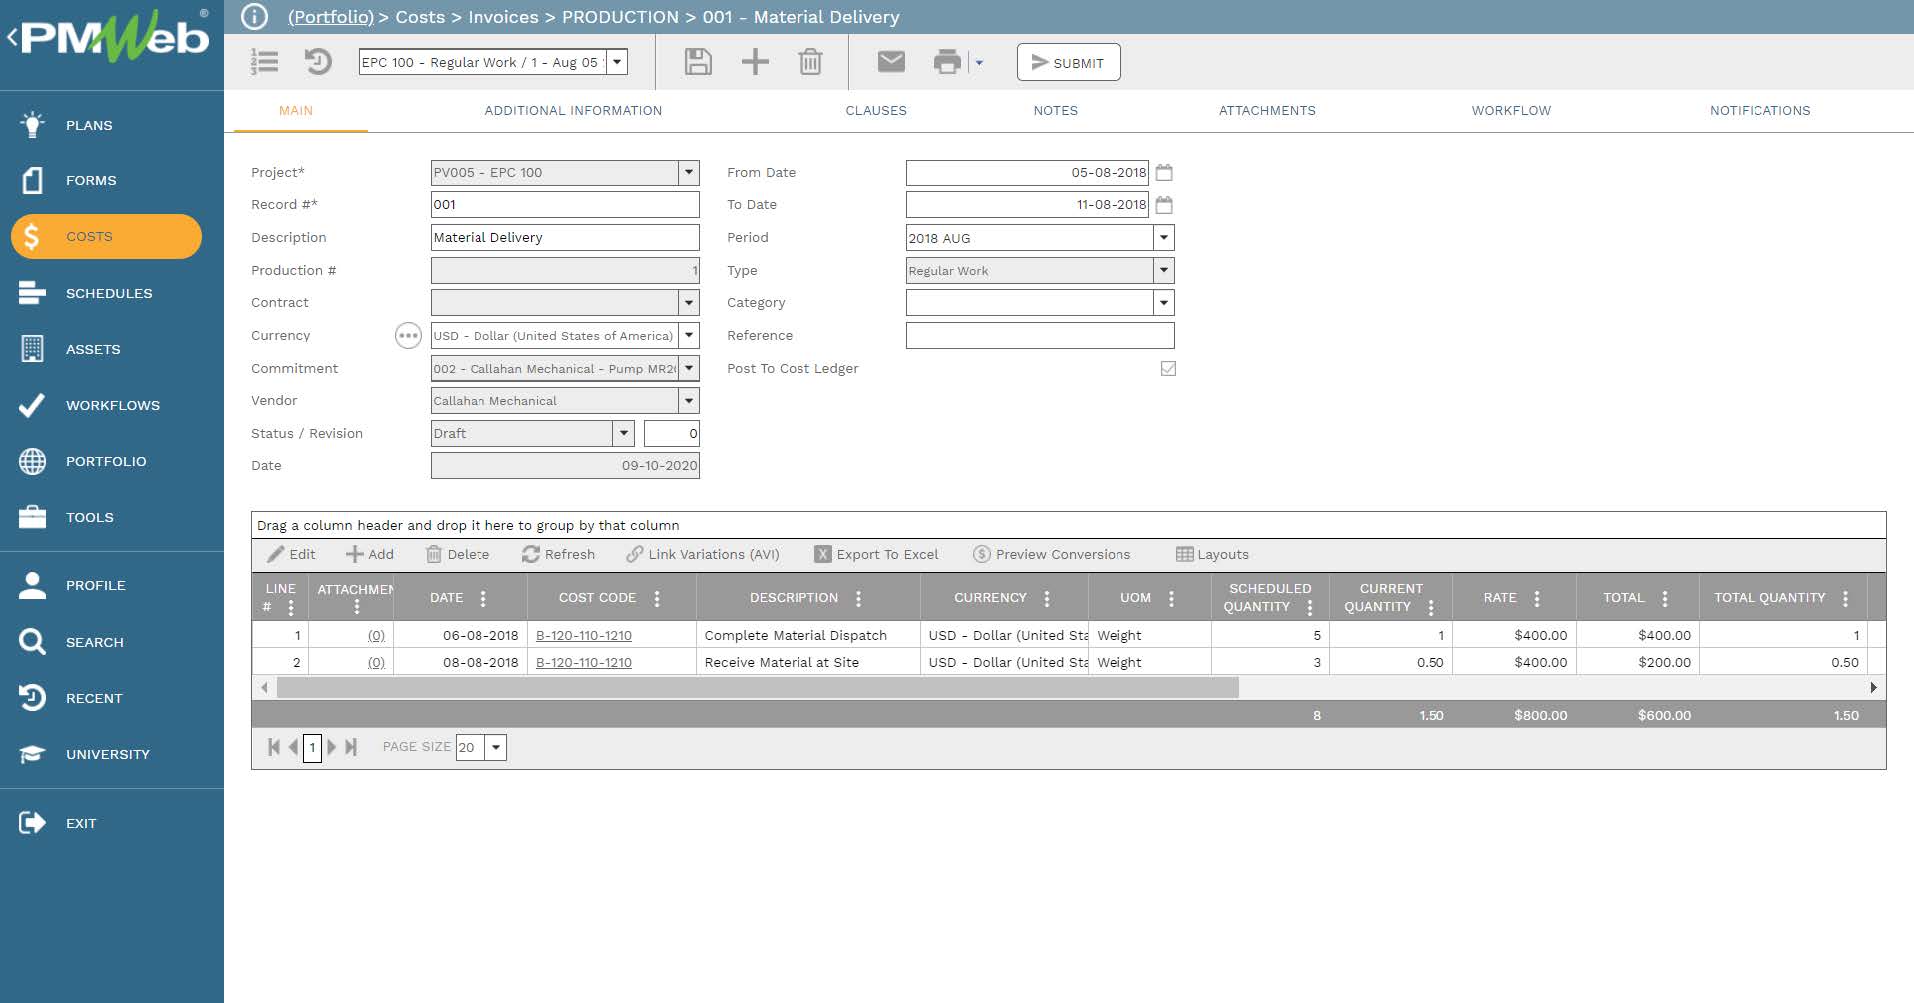 PMWeb 7 costs Invoices Production 
Material Delivery 
Main 